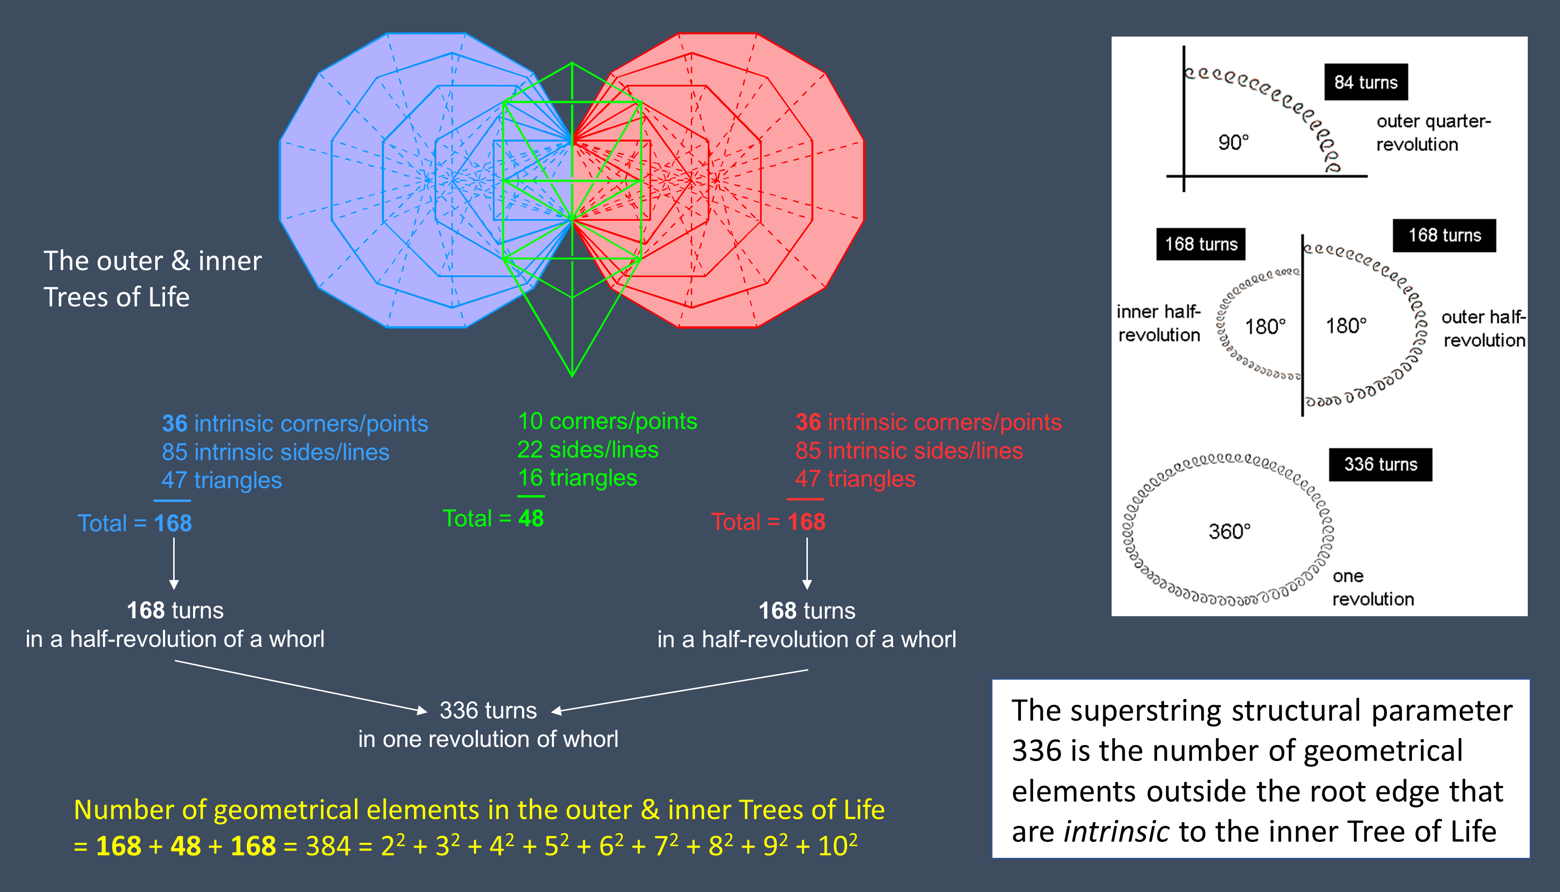 Superstring structural parameter 336 is geometrical parameter of inner Tree of Life 